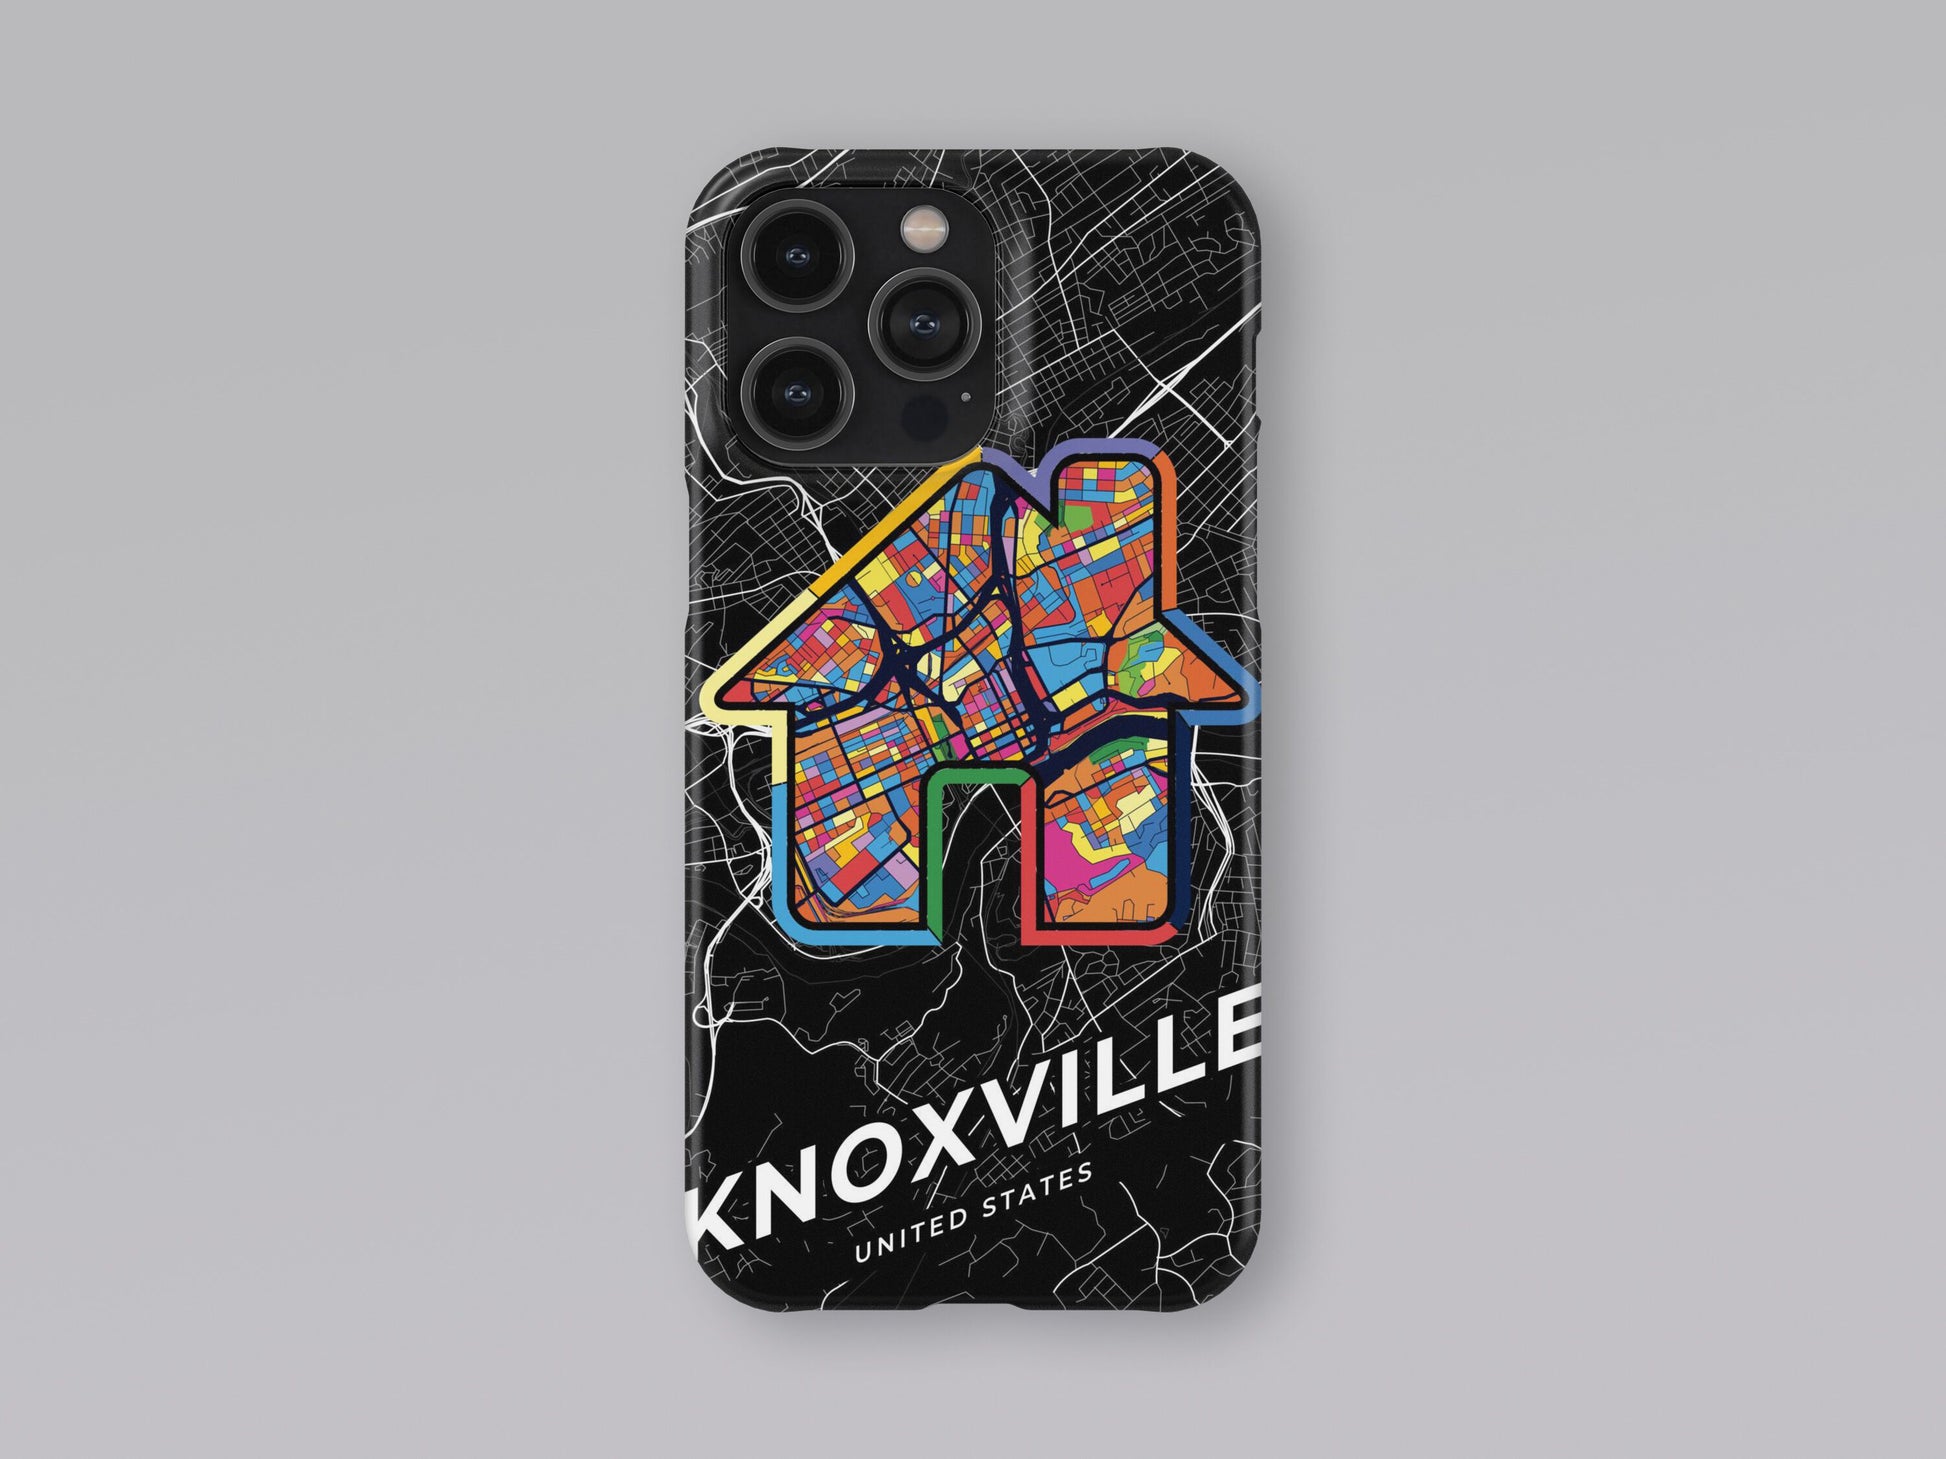 Knoxville Tennessee slim phone case with colorful icon. Birthday, wedding or housewarming gift. Couple match cases. 3